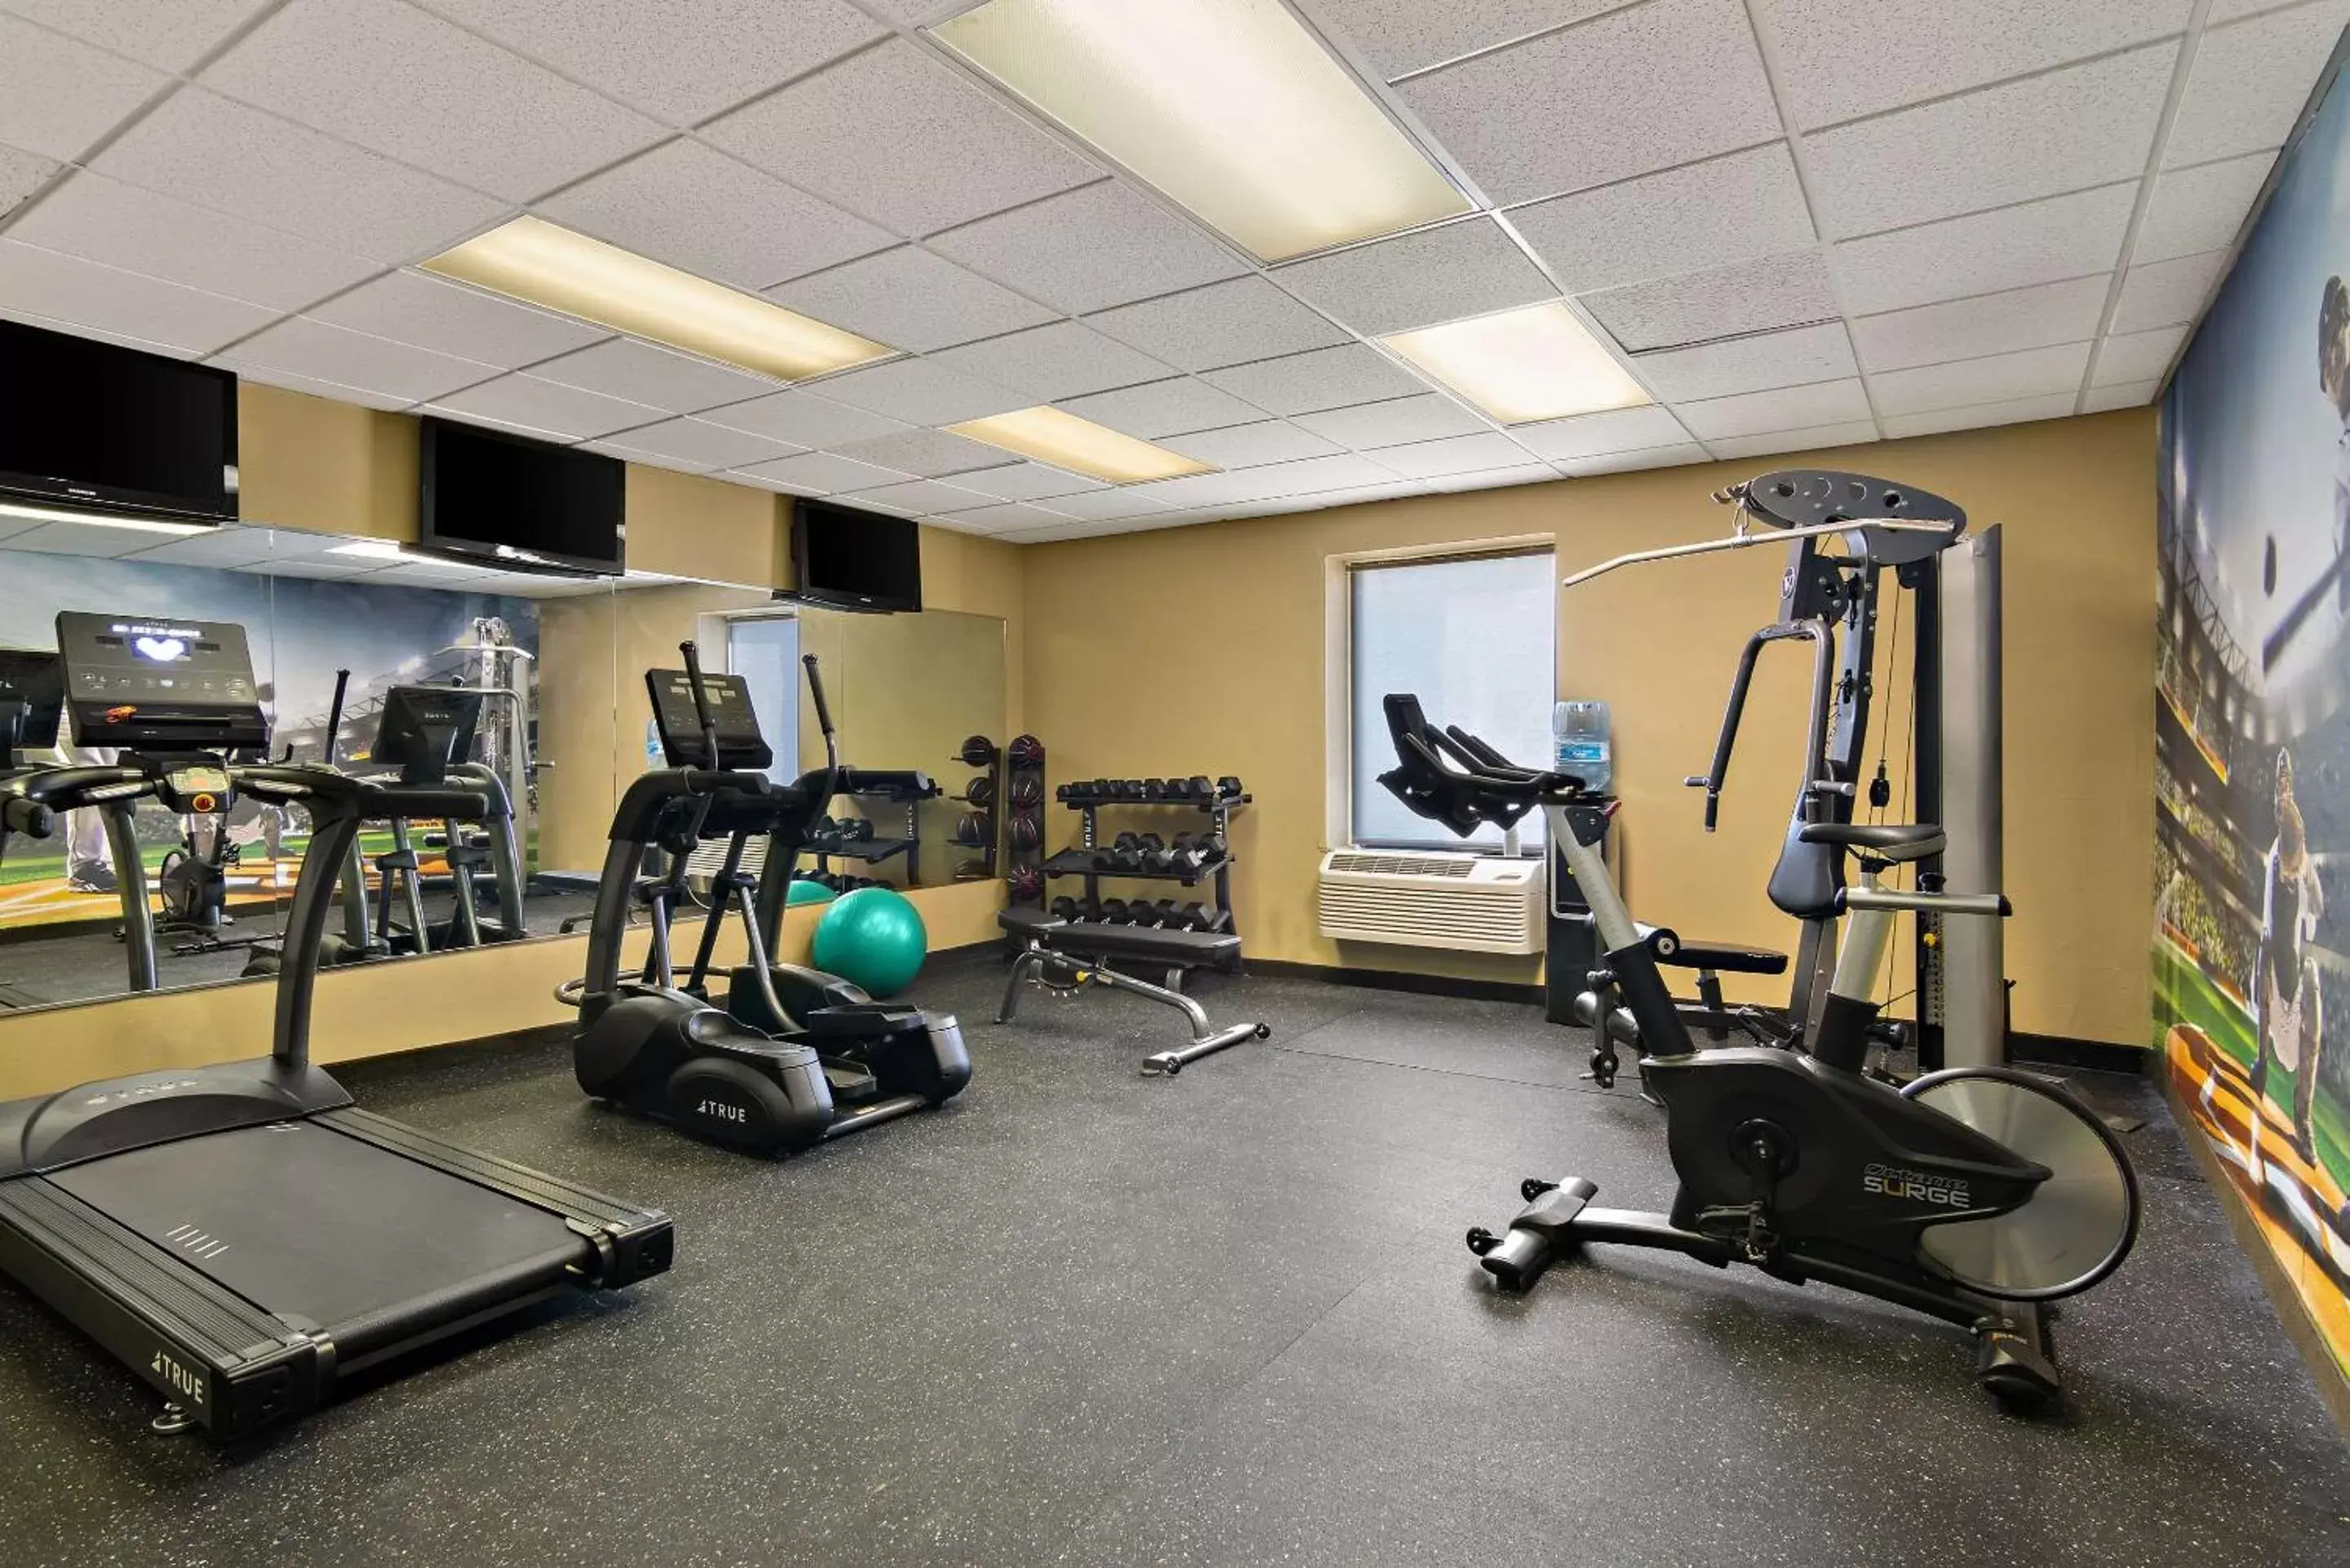 Fitness centre/facilities, Fitness Center/Facilities in Rodeway Inn Bloomington - Normal near I-55 and University